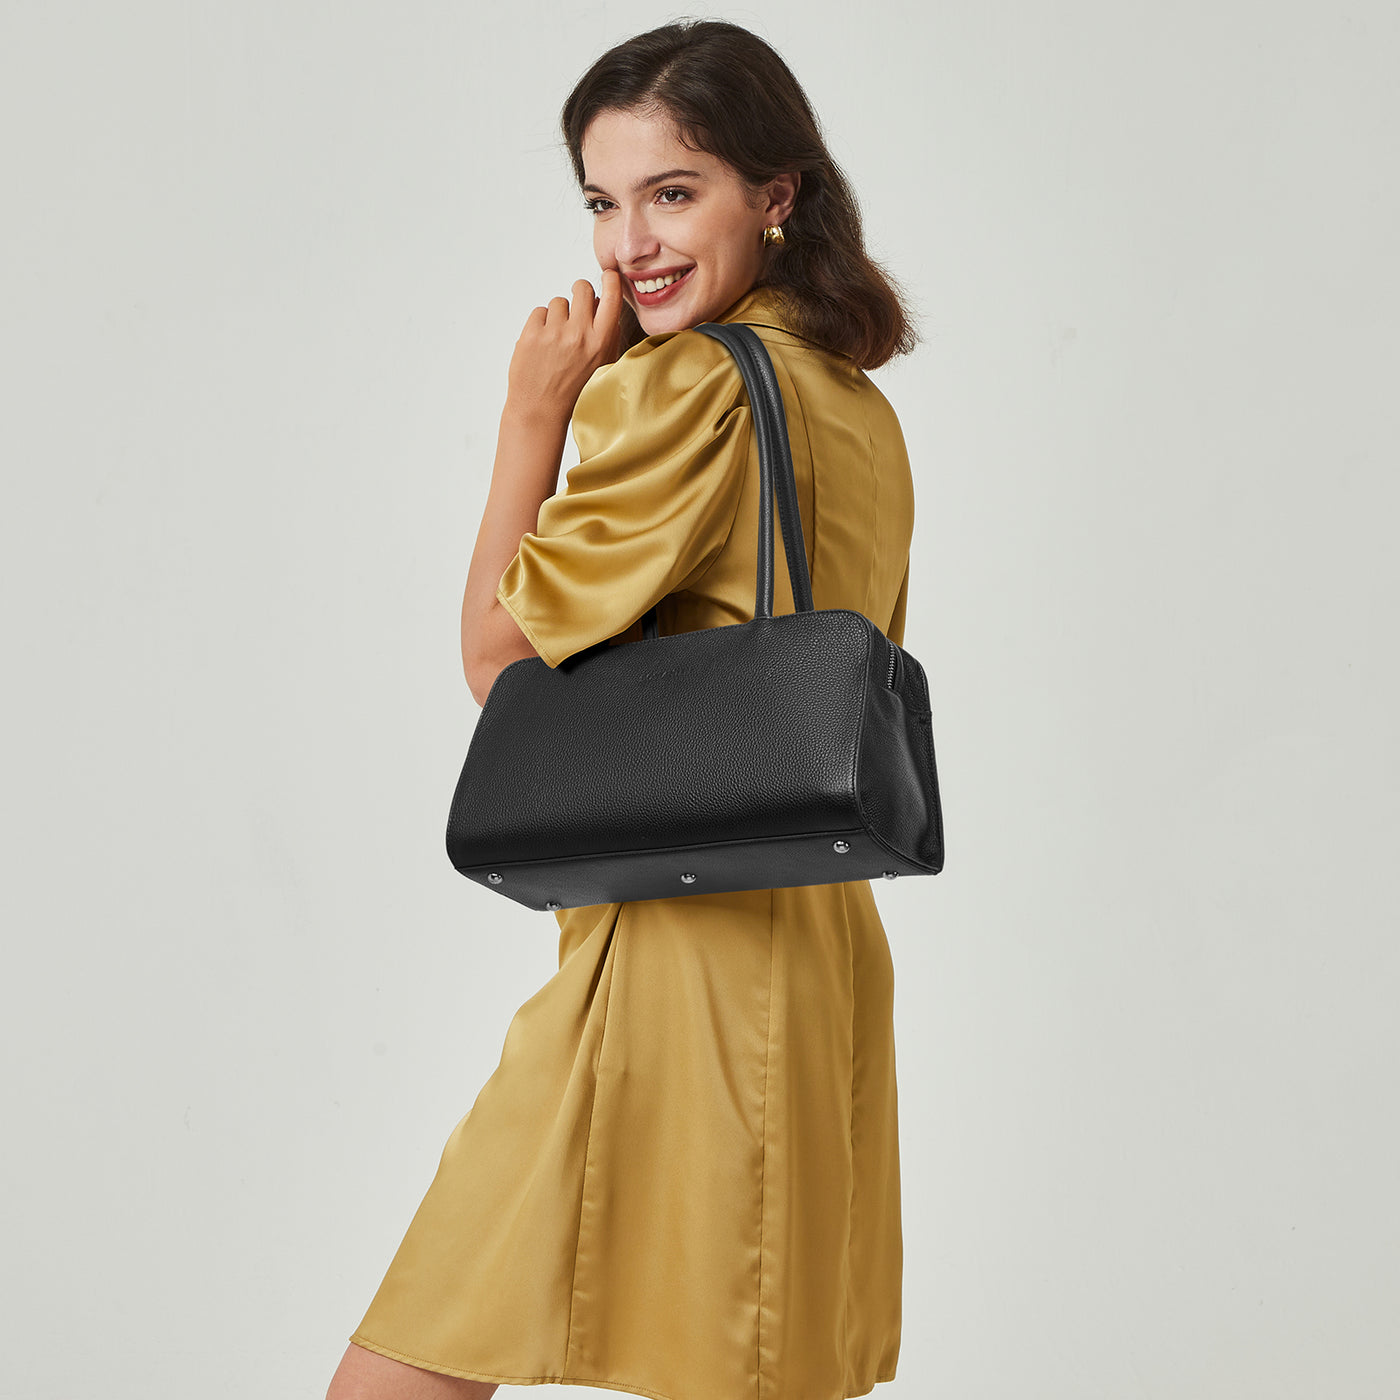 Otilia Functional and Fashionable Leather Shoulder Bag for Ladies